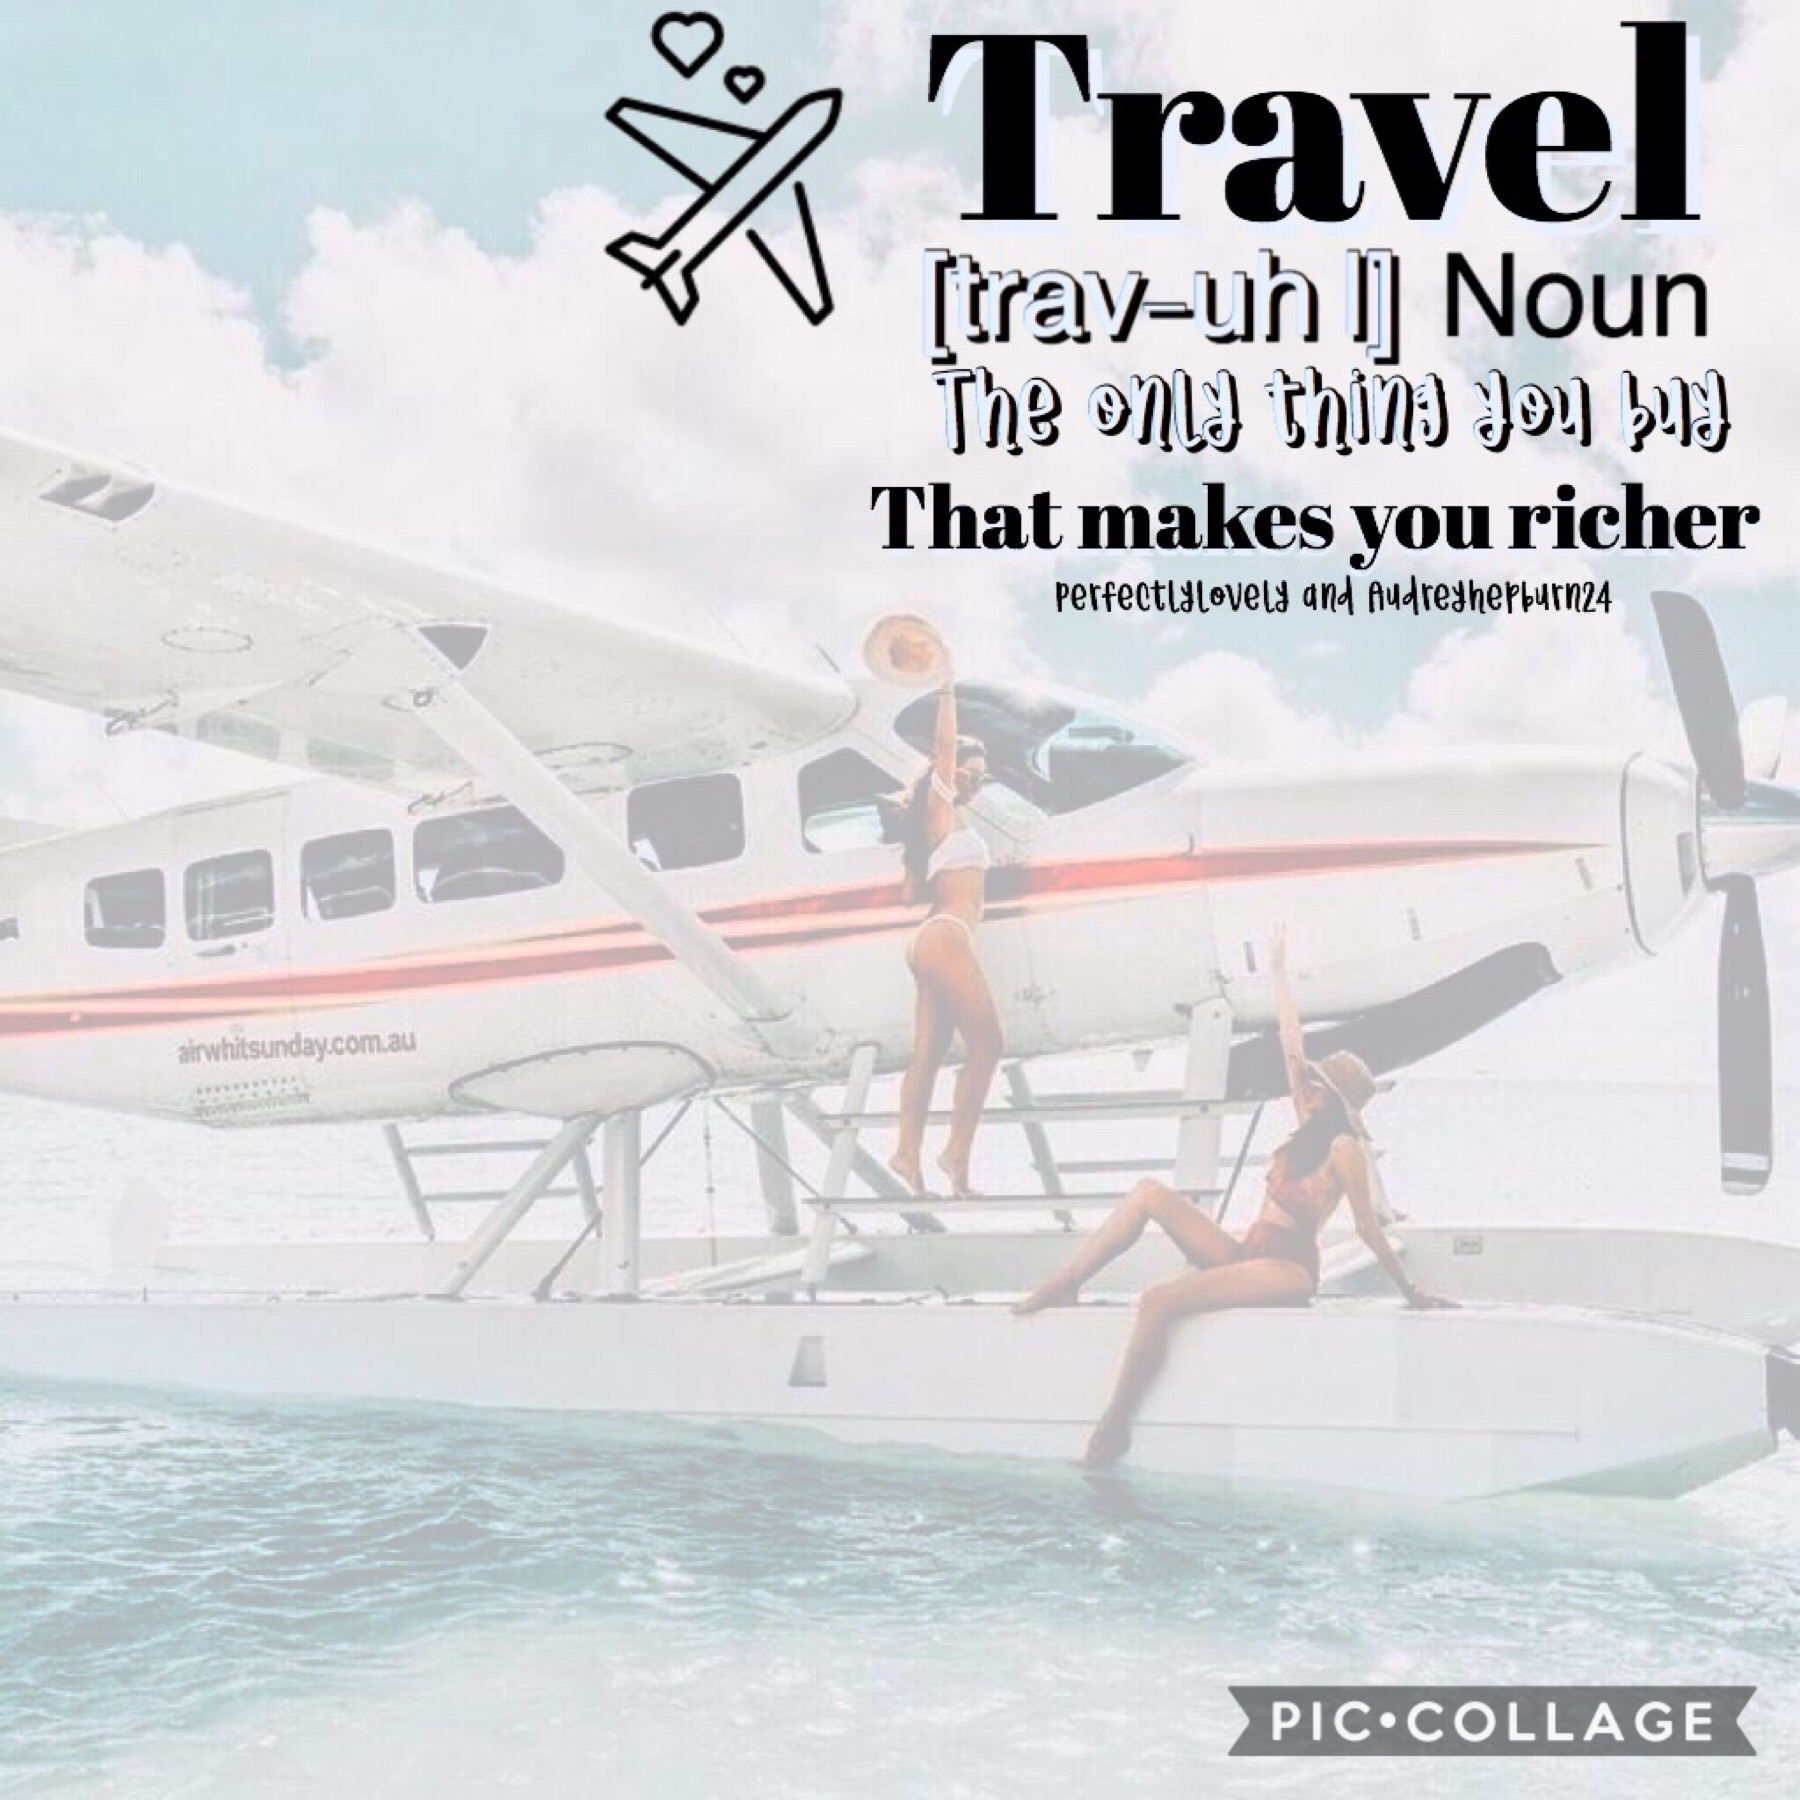 Collab with.... 
the amazing audreyhepburn24!
Go follow her! She did the background and quote and I put it all together
Qotd: favorite vacation spot?
Aotd: has Italy